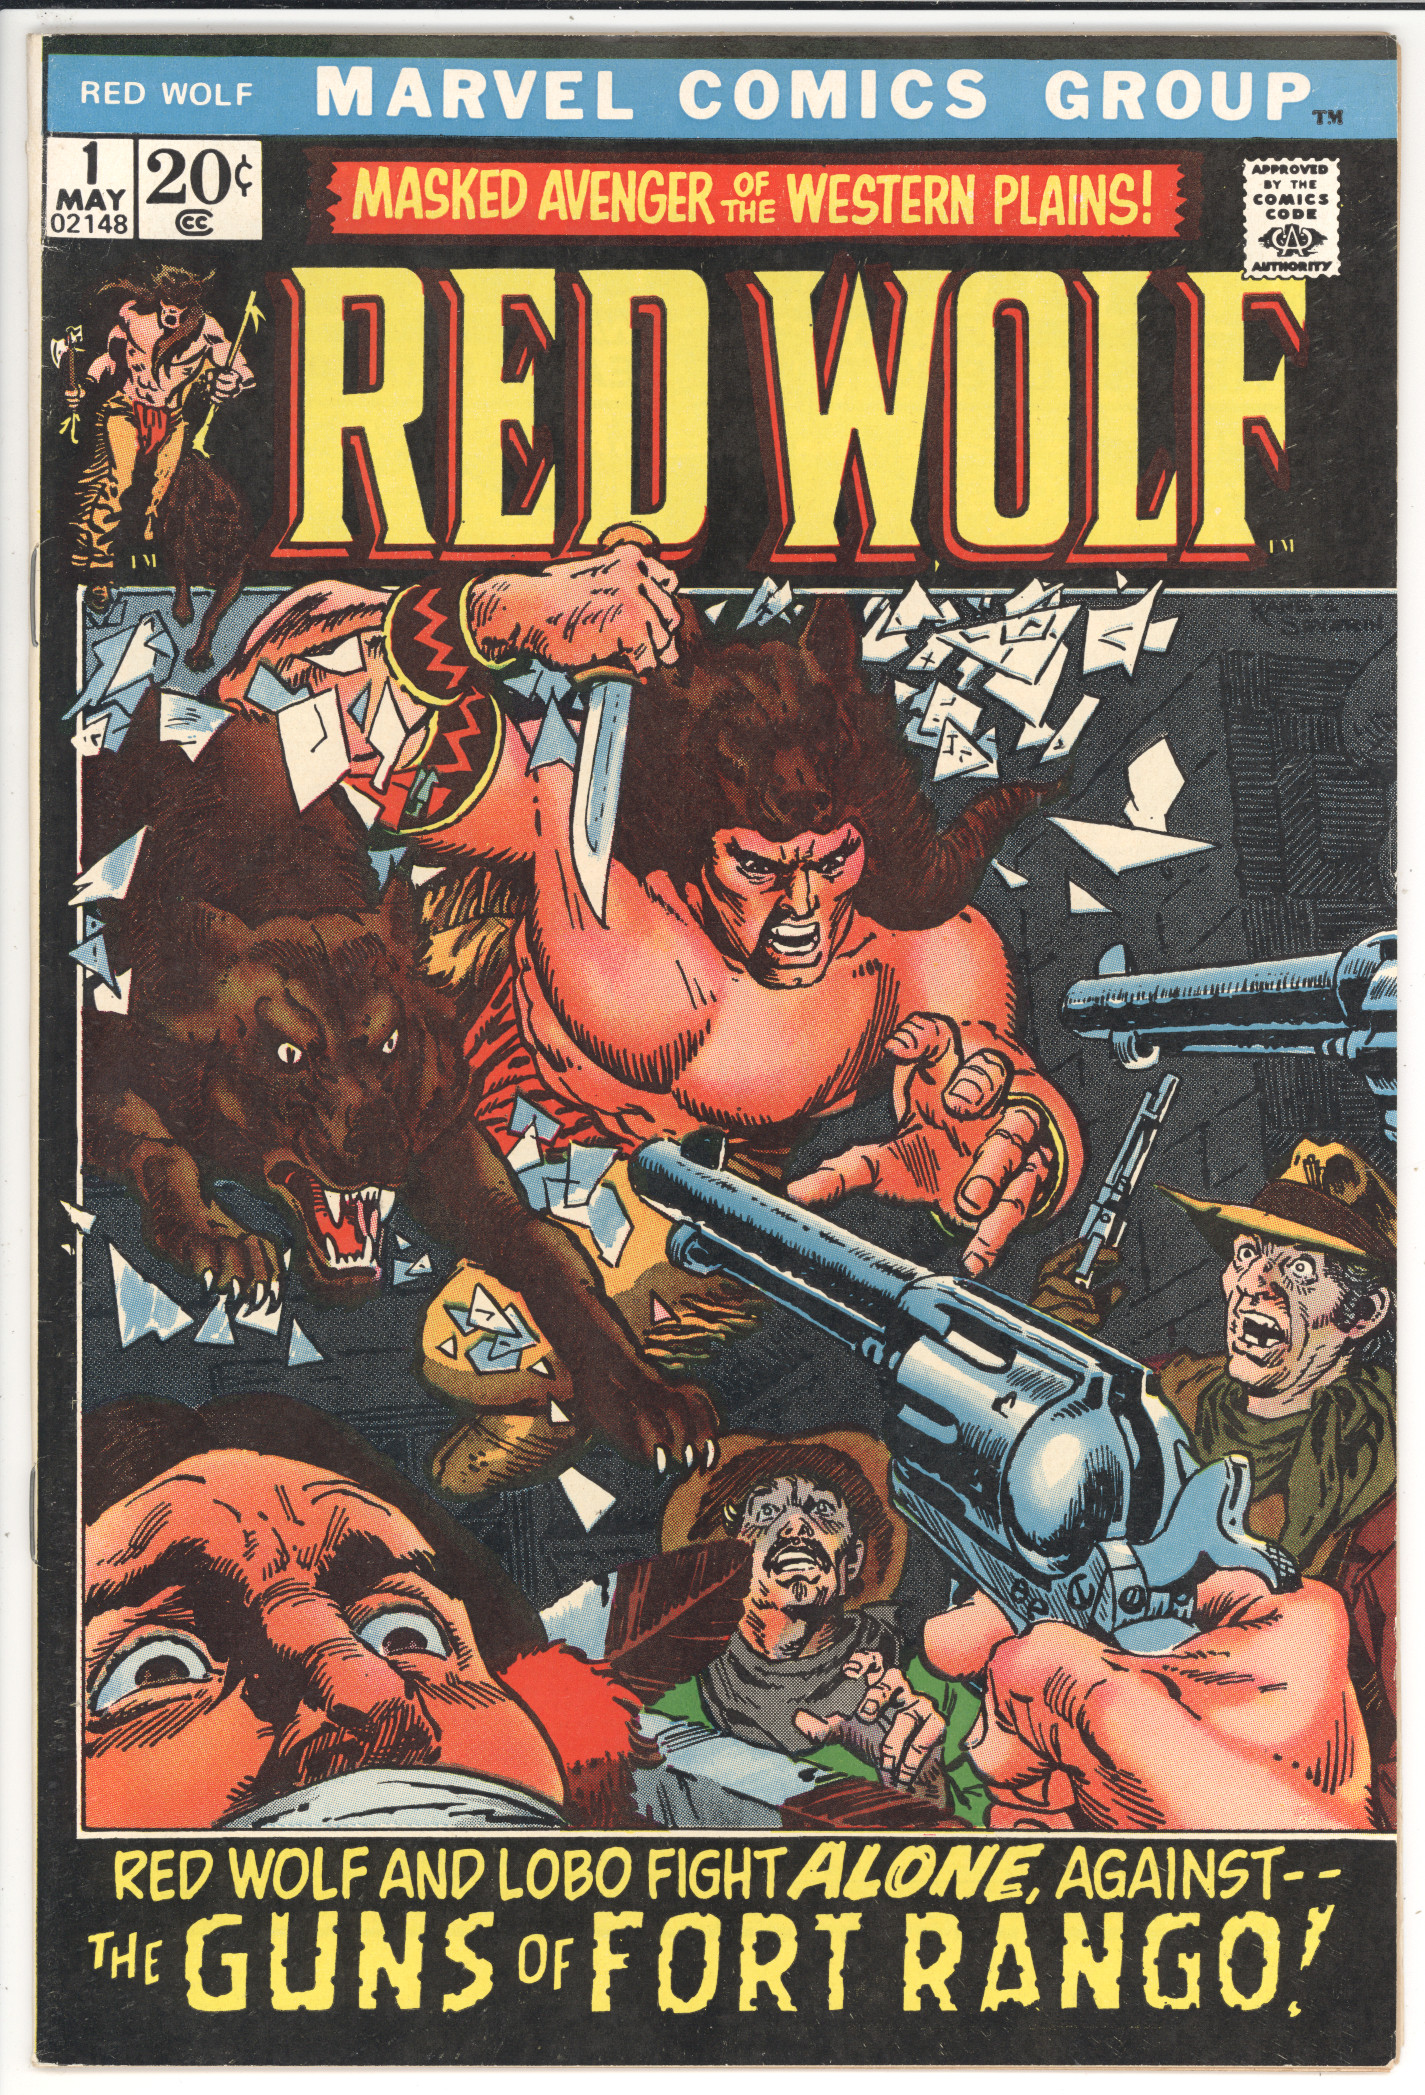 Red Wolf #1 front